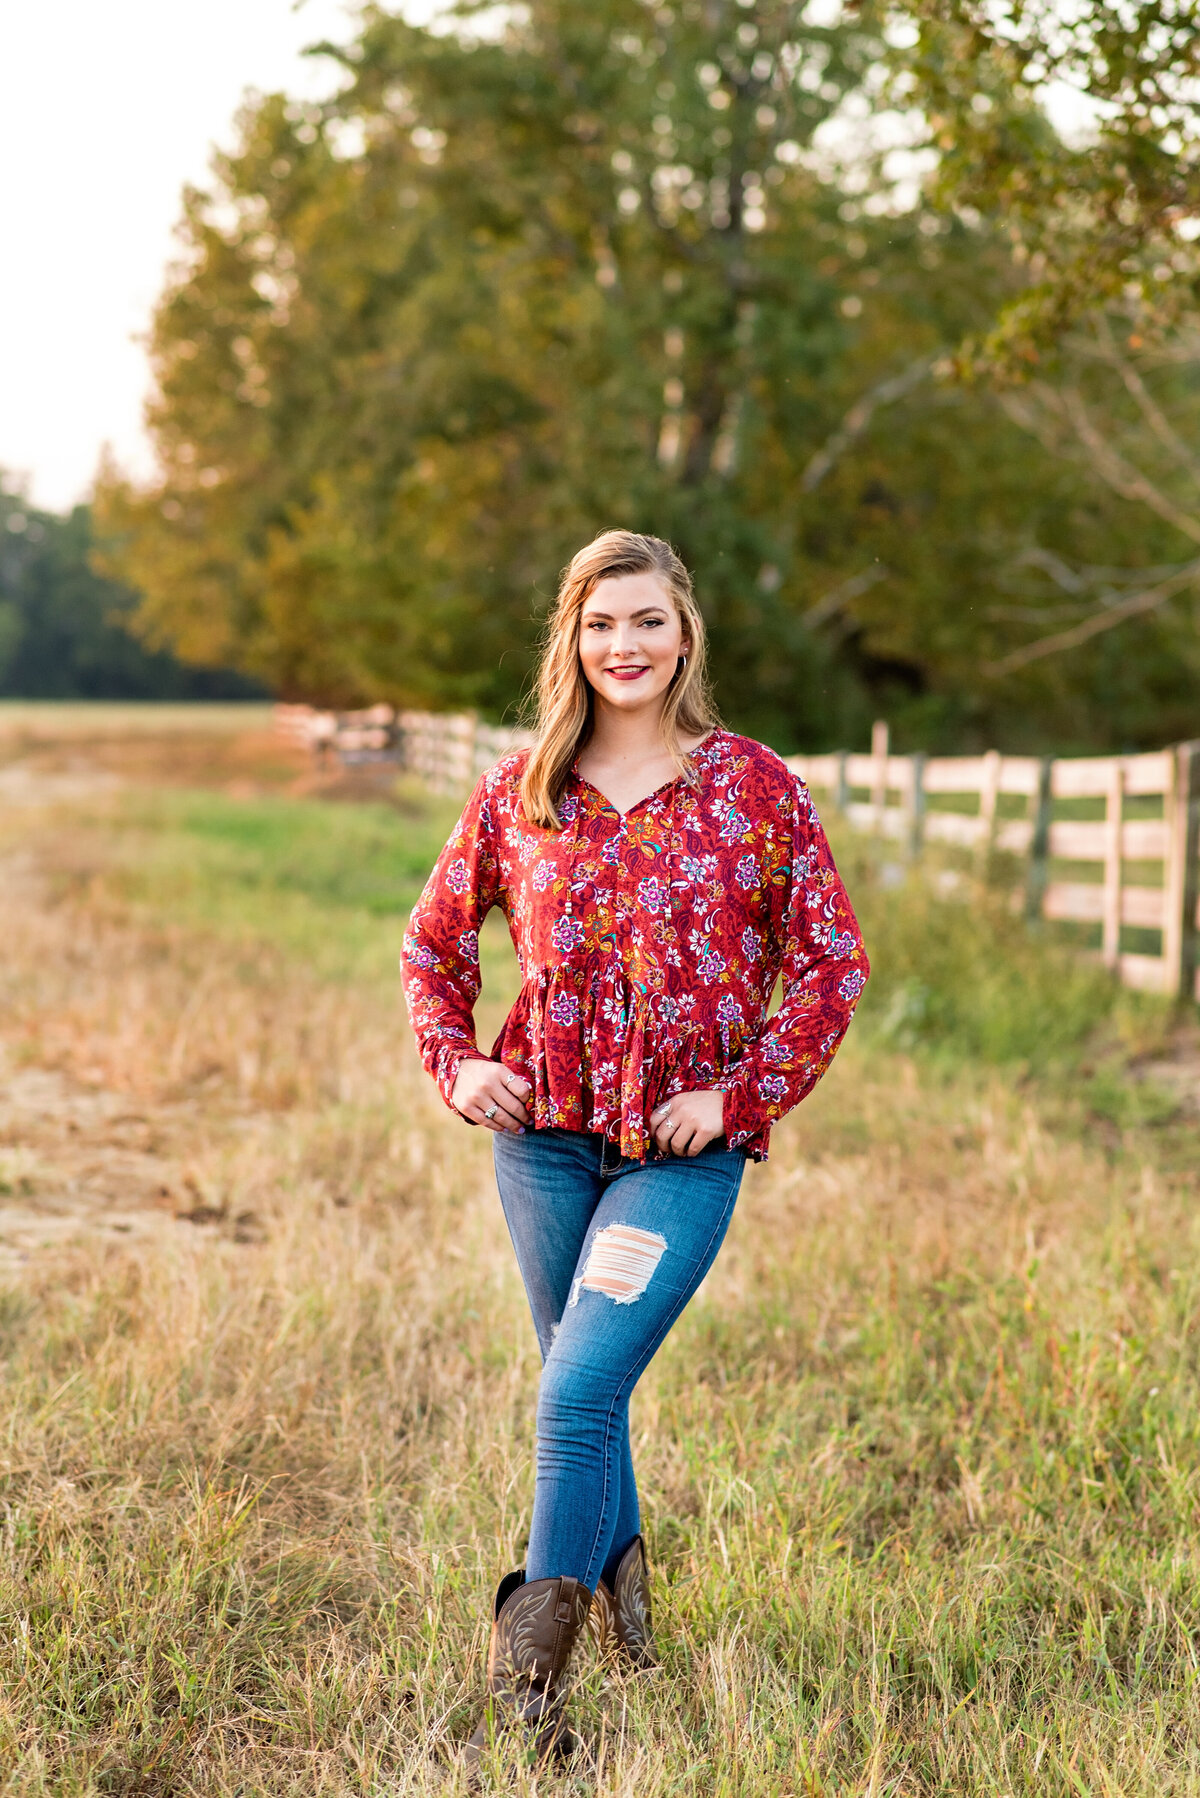 Senior girl poses in field in the country during sunset wearing jeans and a red blouse.